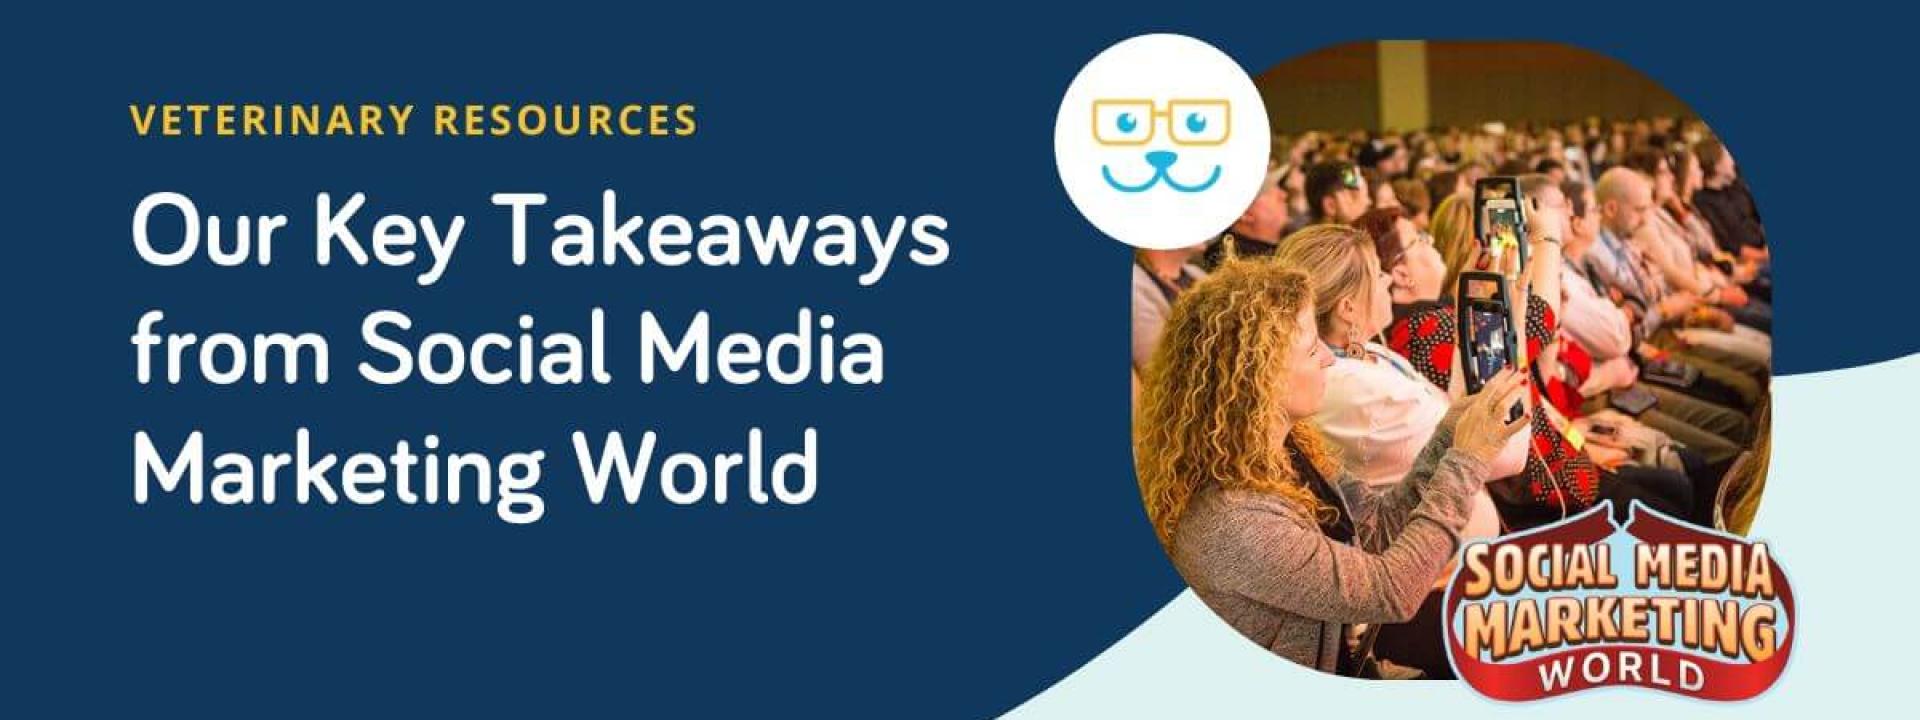 Social Media Marketing World (SMMW): Experts Share Insights on Social Media Strategy for Your Veterinary Practice